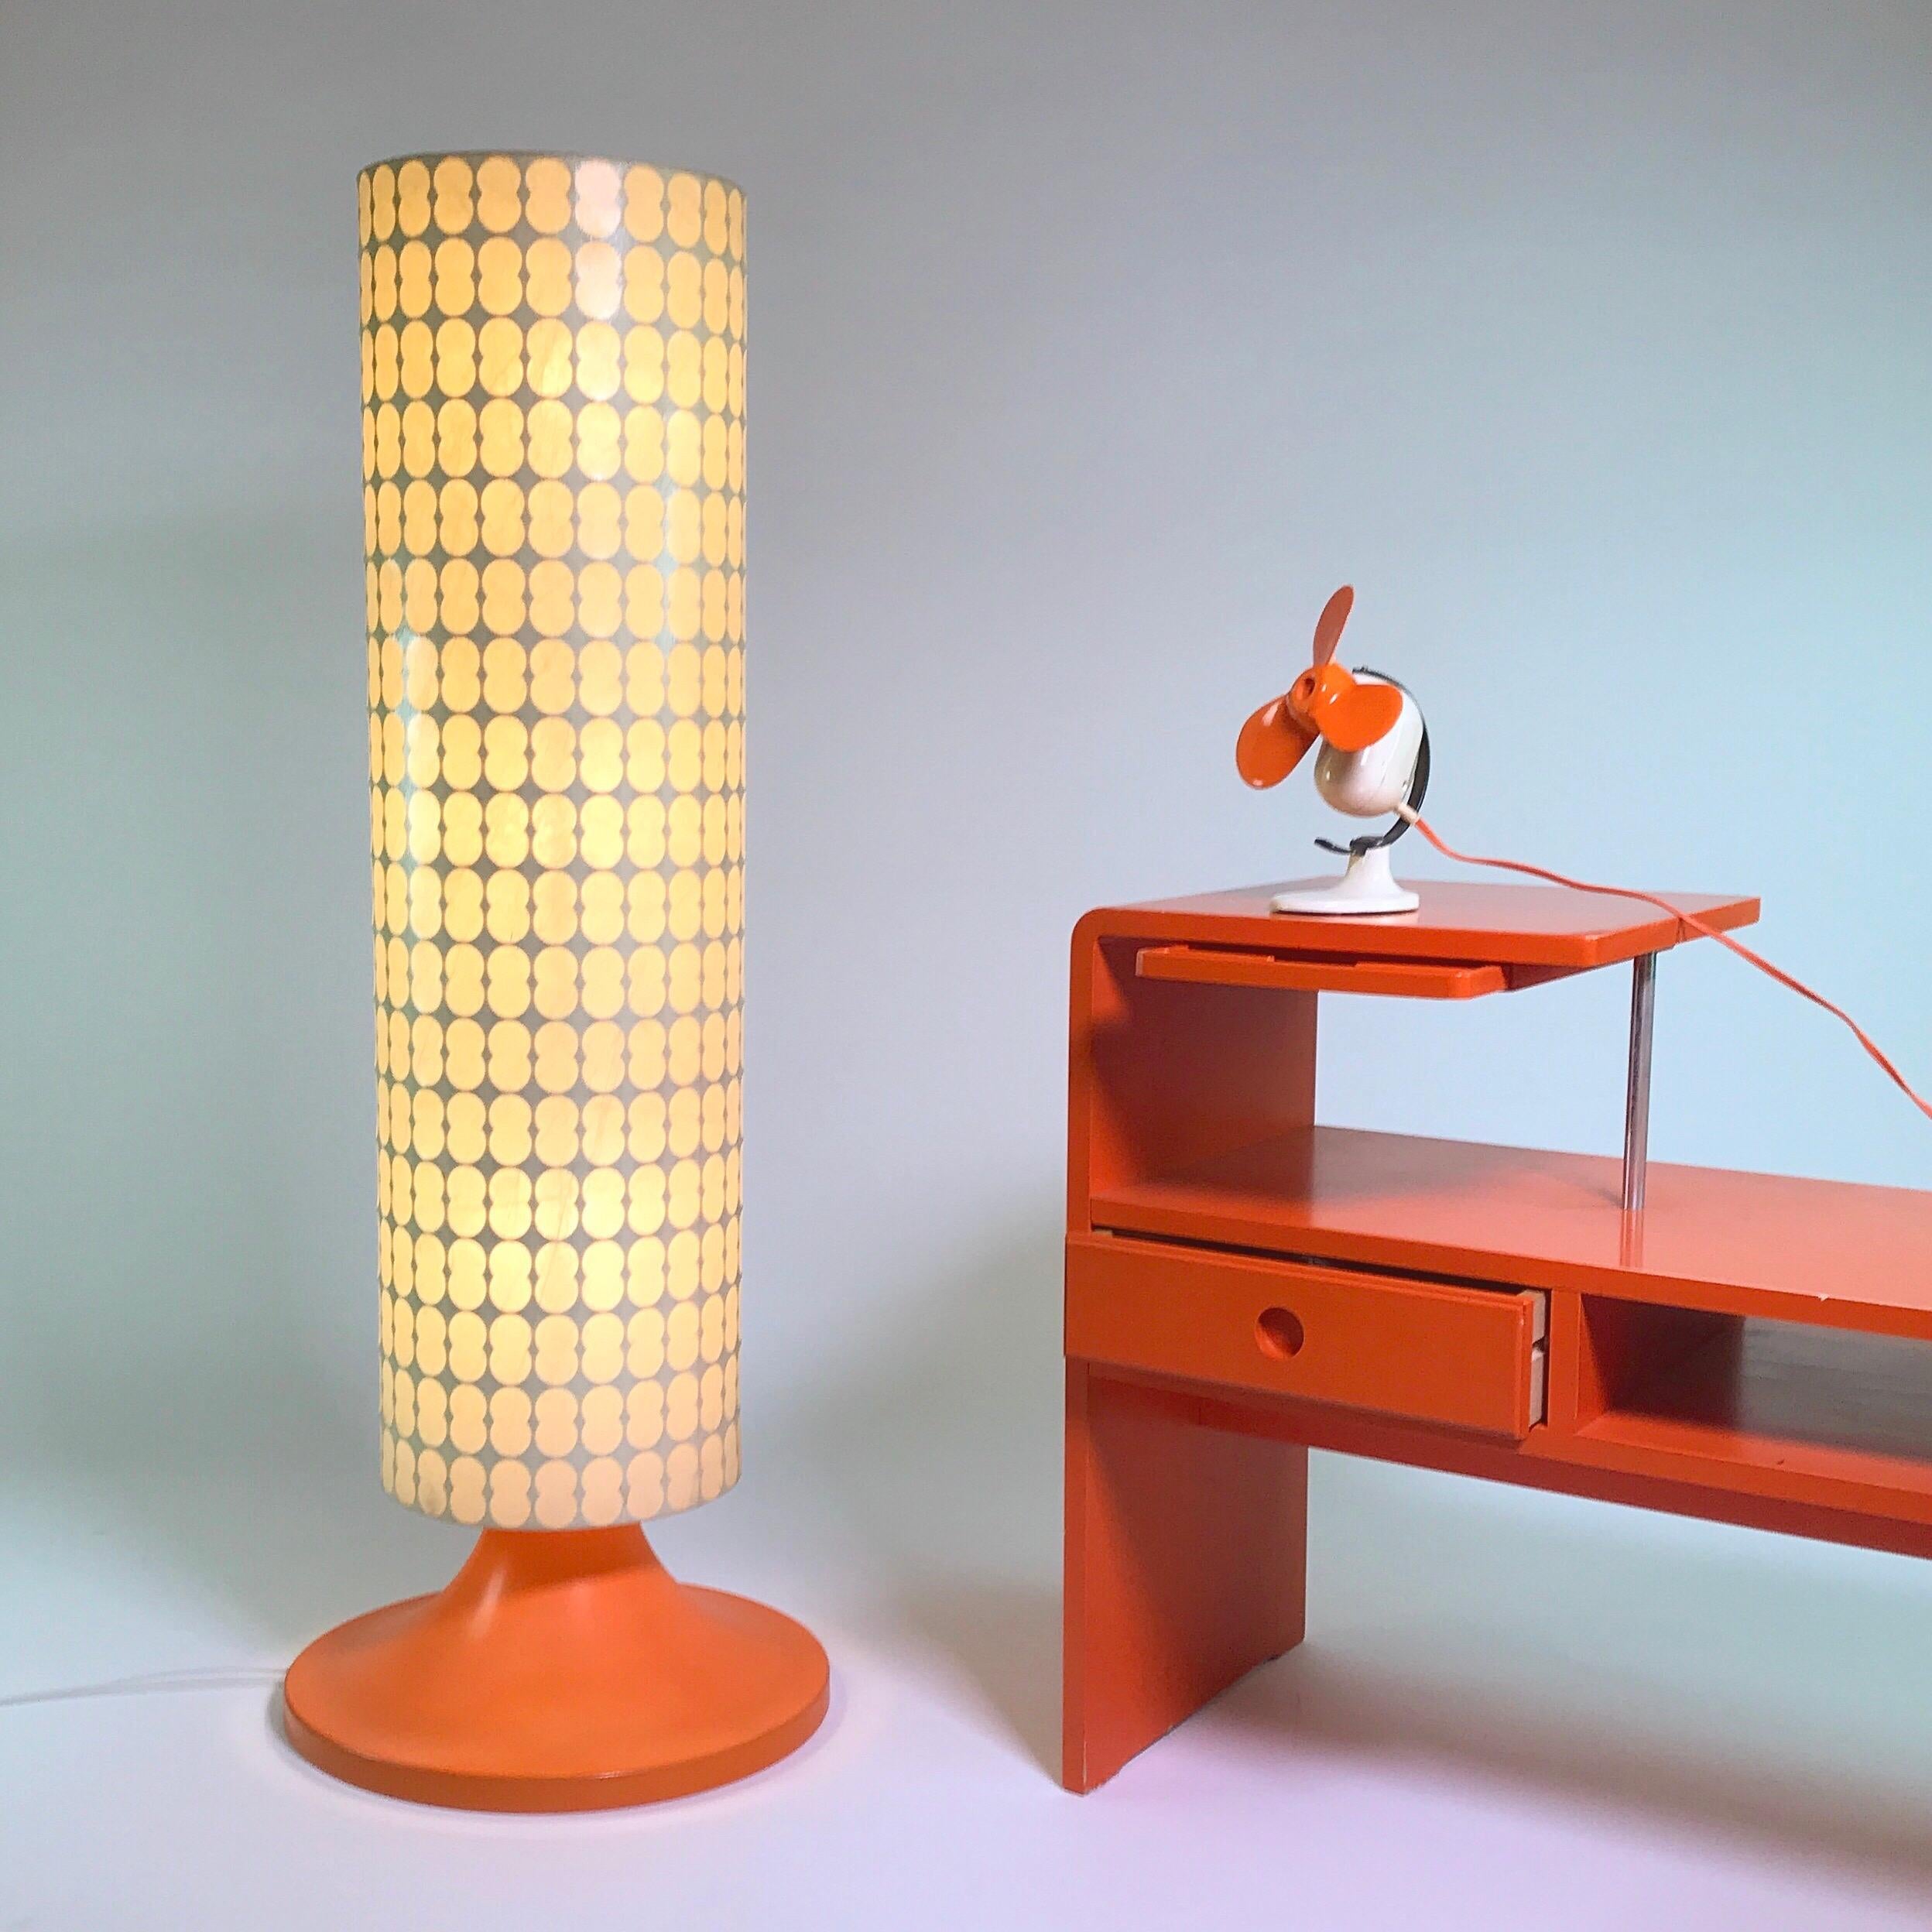 Beautiful and rare space age floor lamp with tulip shaped base and geometric tube shade by Goldkant Leuchten, Germany, 1970s.

Orange lacquered tulip shaped plastic base and geometric decorated plastic skin with three bulbs. 

Eye-catching